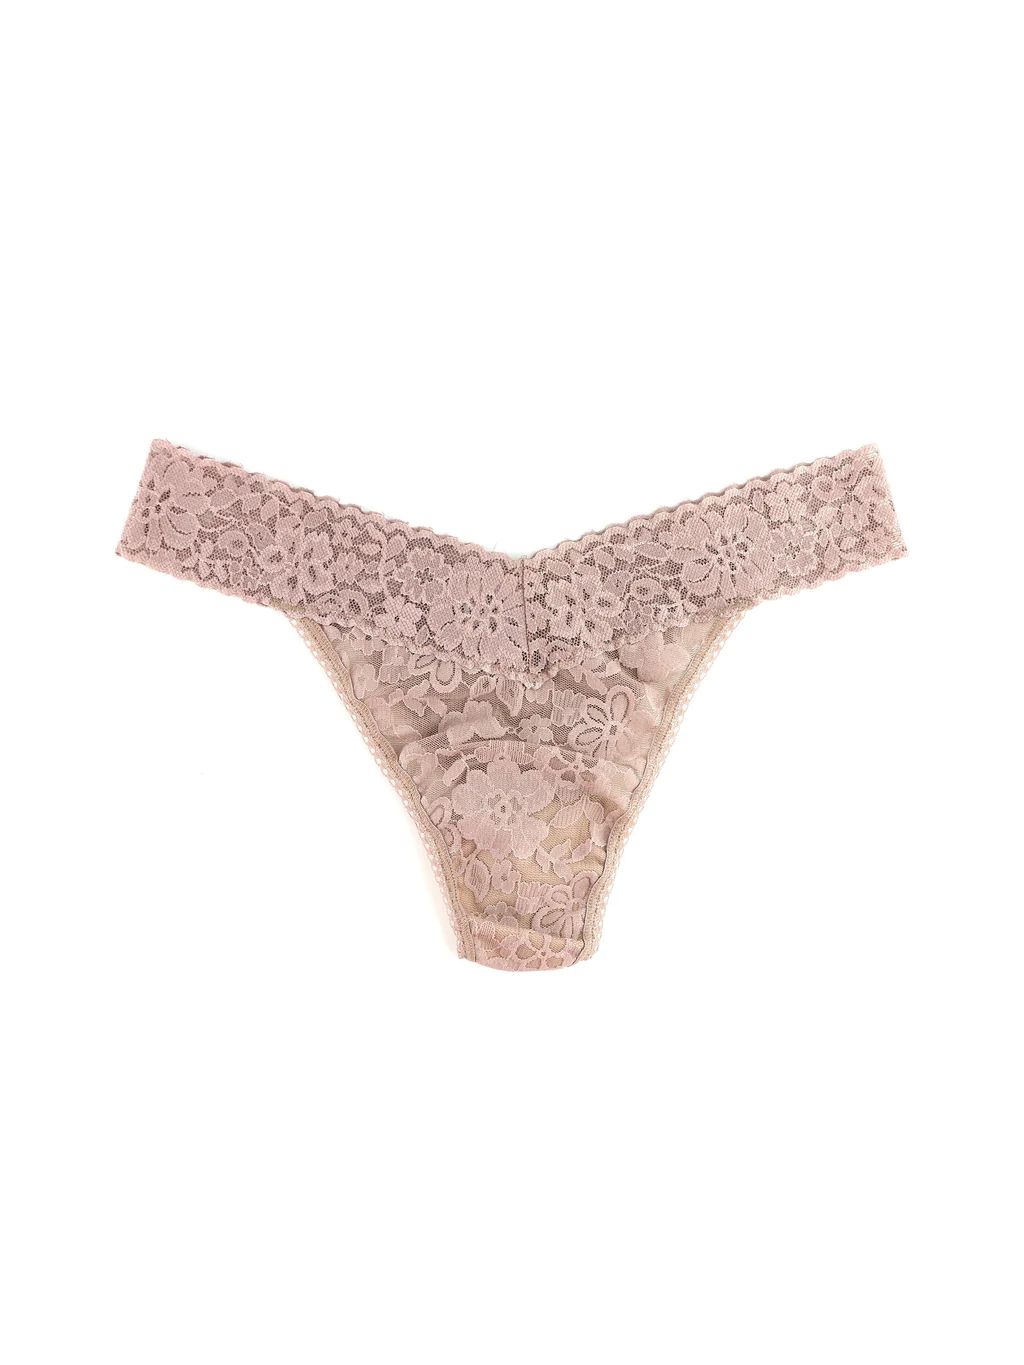 Daily Lace™ Original Rise Thong Taupe Sale | Hanky Panky